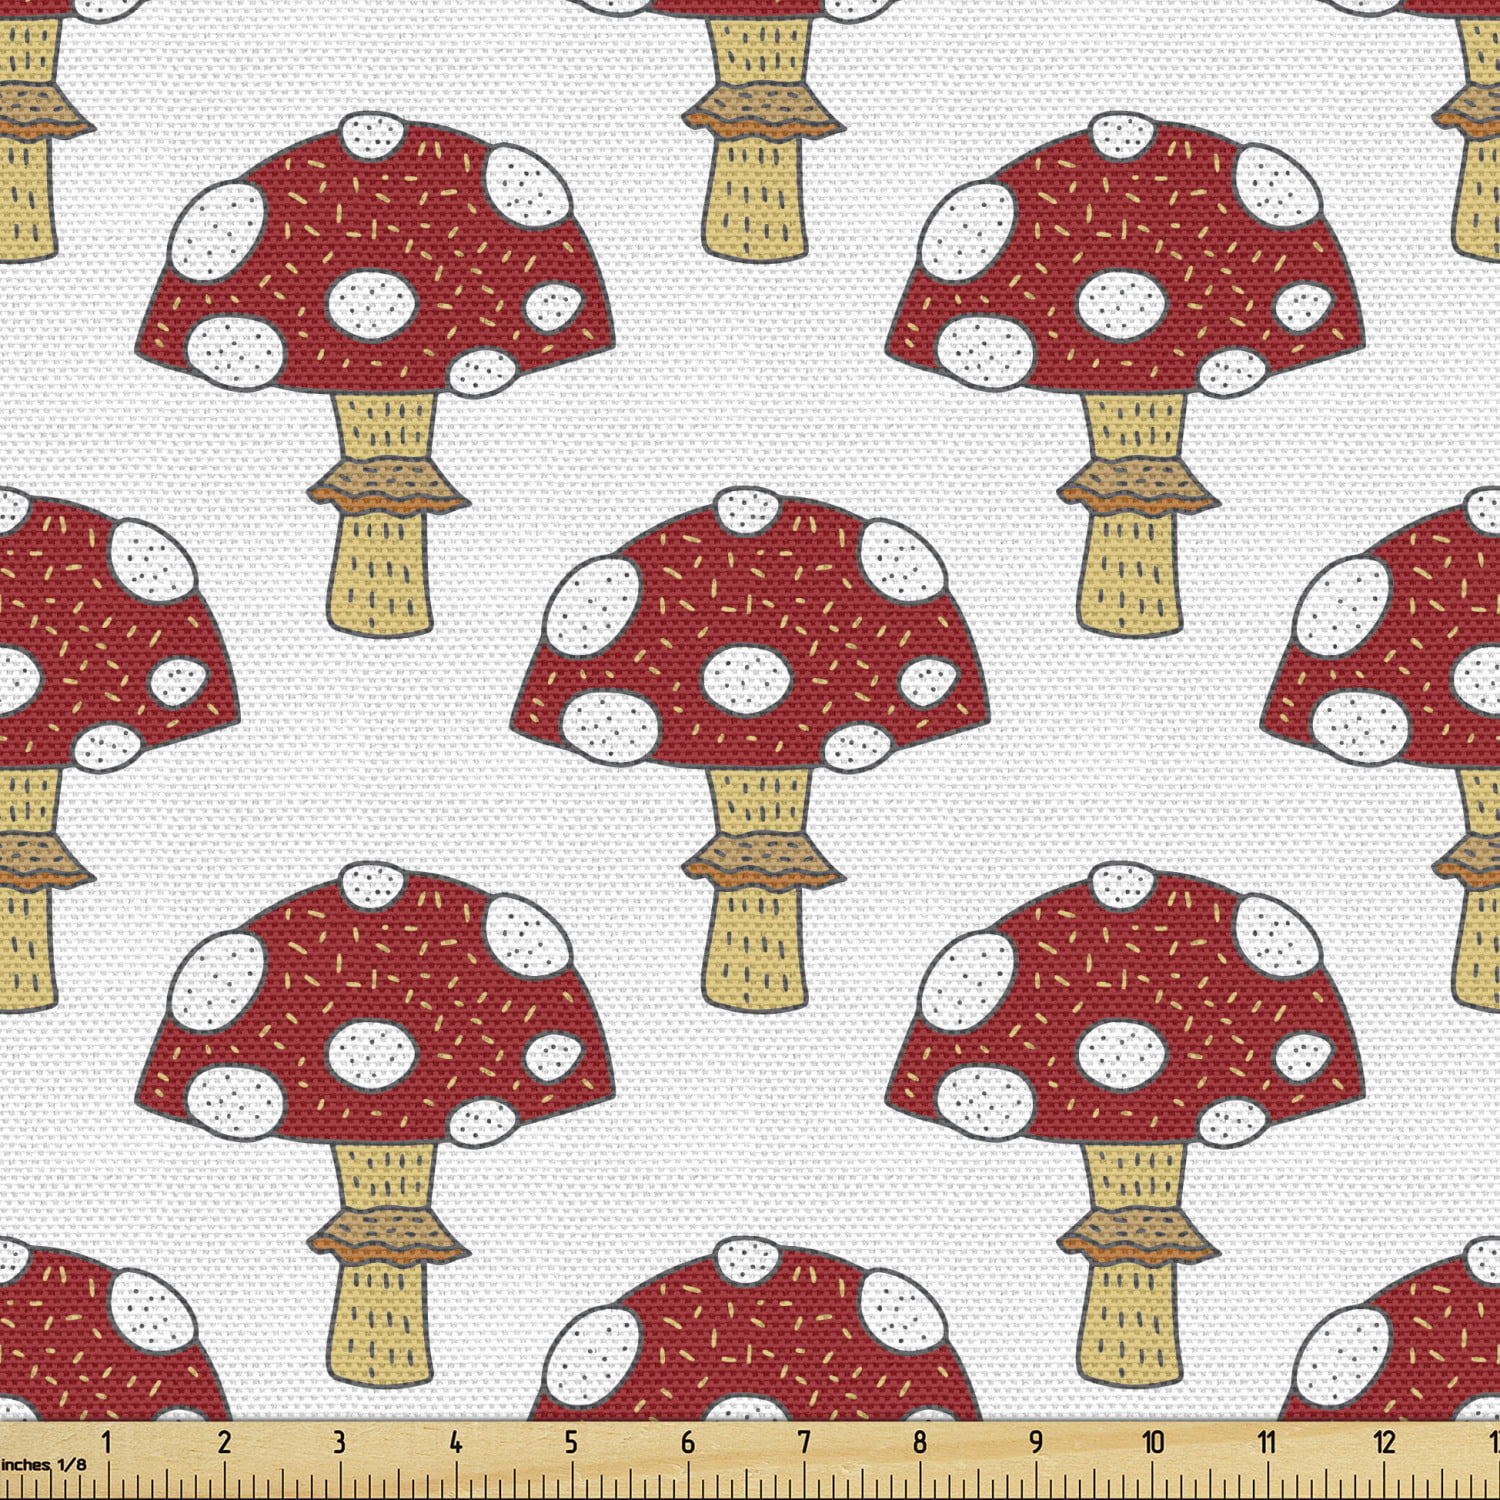 Mushroom fabric 100% cotton quilting fabric by the yard Pink mushrooms on salmon pink